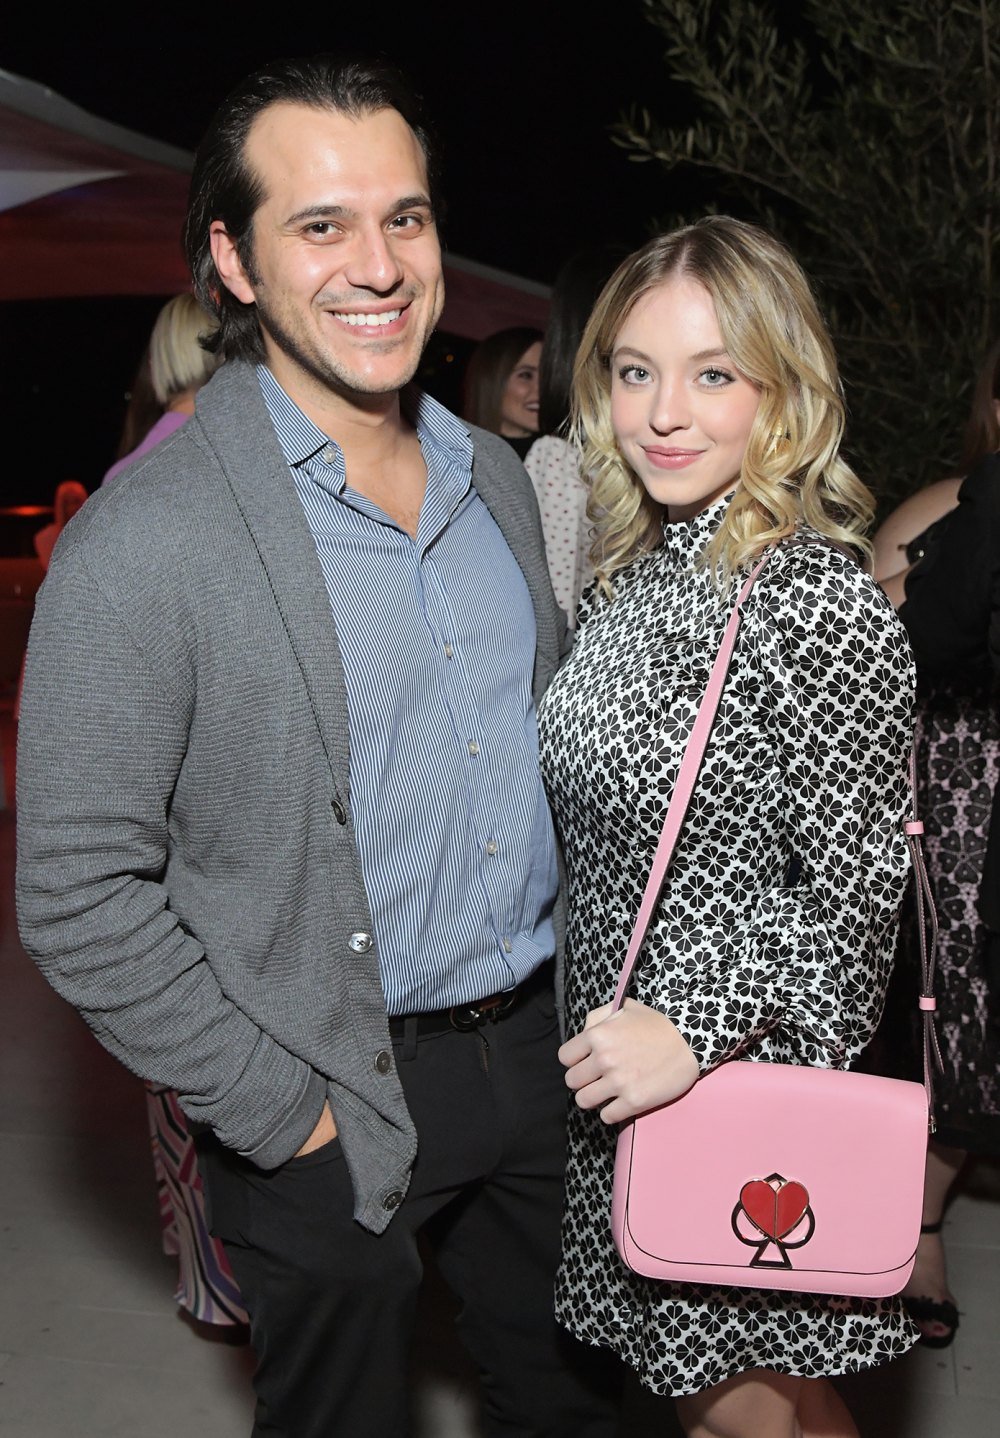 Sydney Sweeney's Fiance Jonathan Davino Joins Her at 'SNL' Afterparty After Shout-Out Monologue